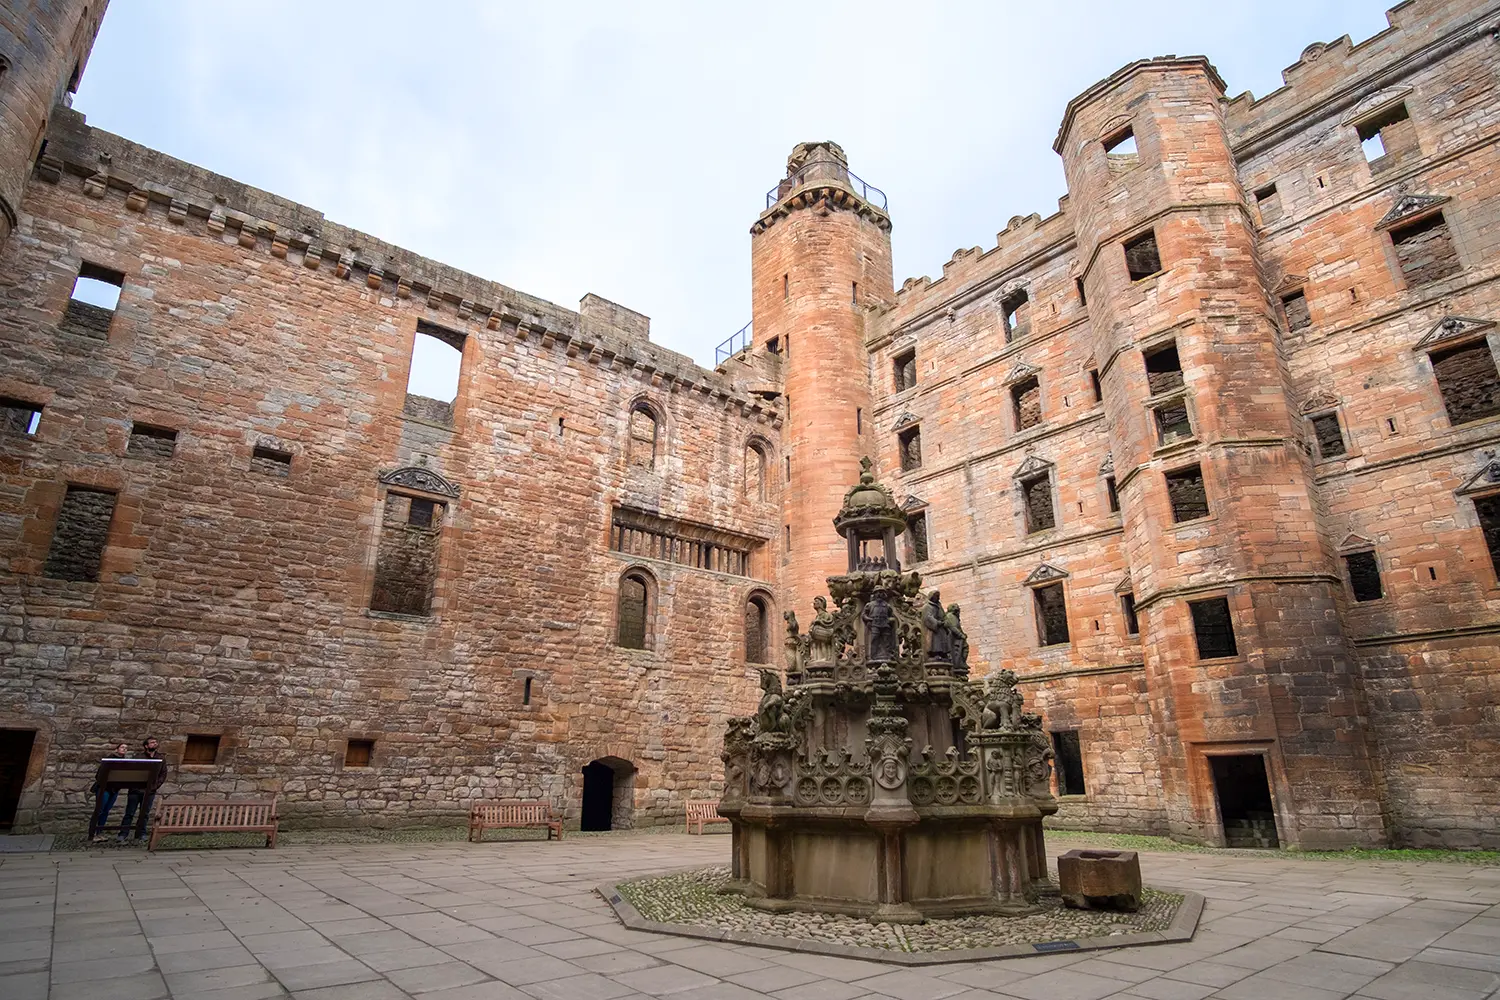 Linlithgow Palace in the town of Linlithgow, West Lothian, Scotland